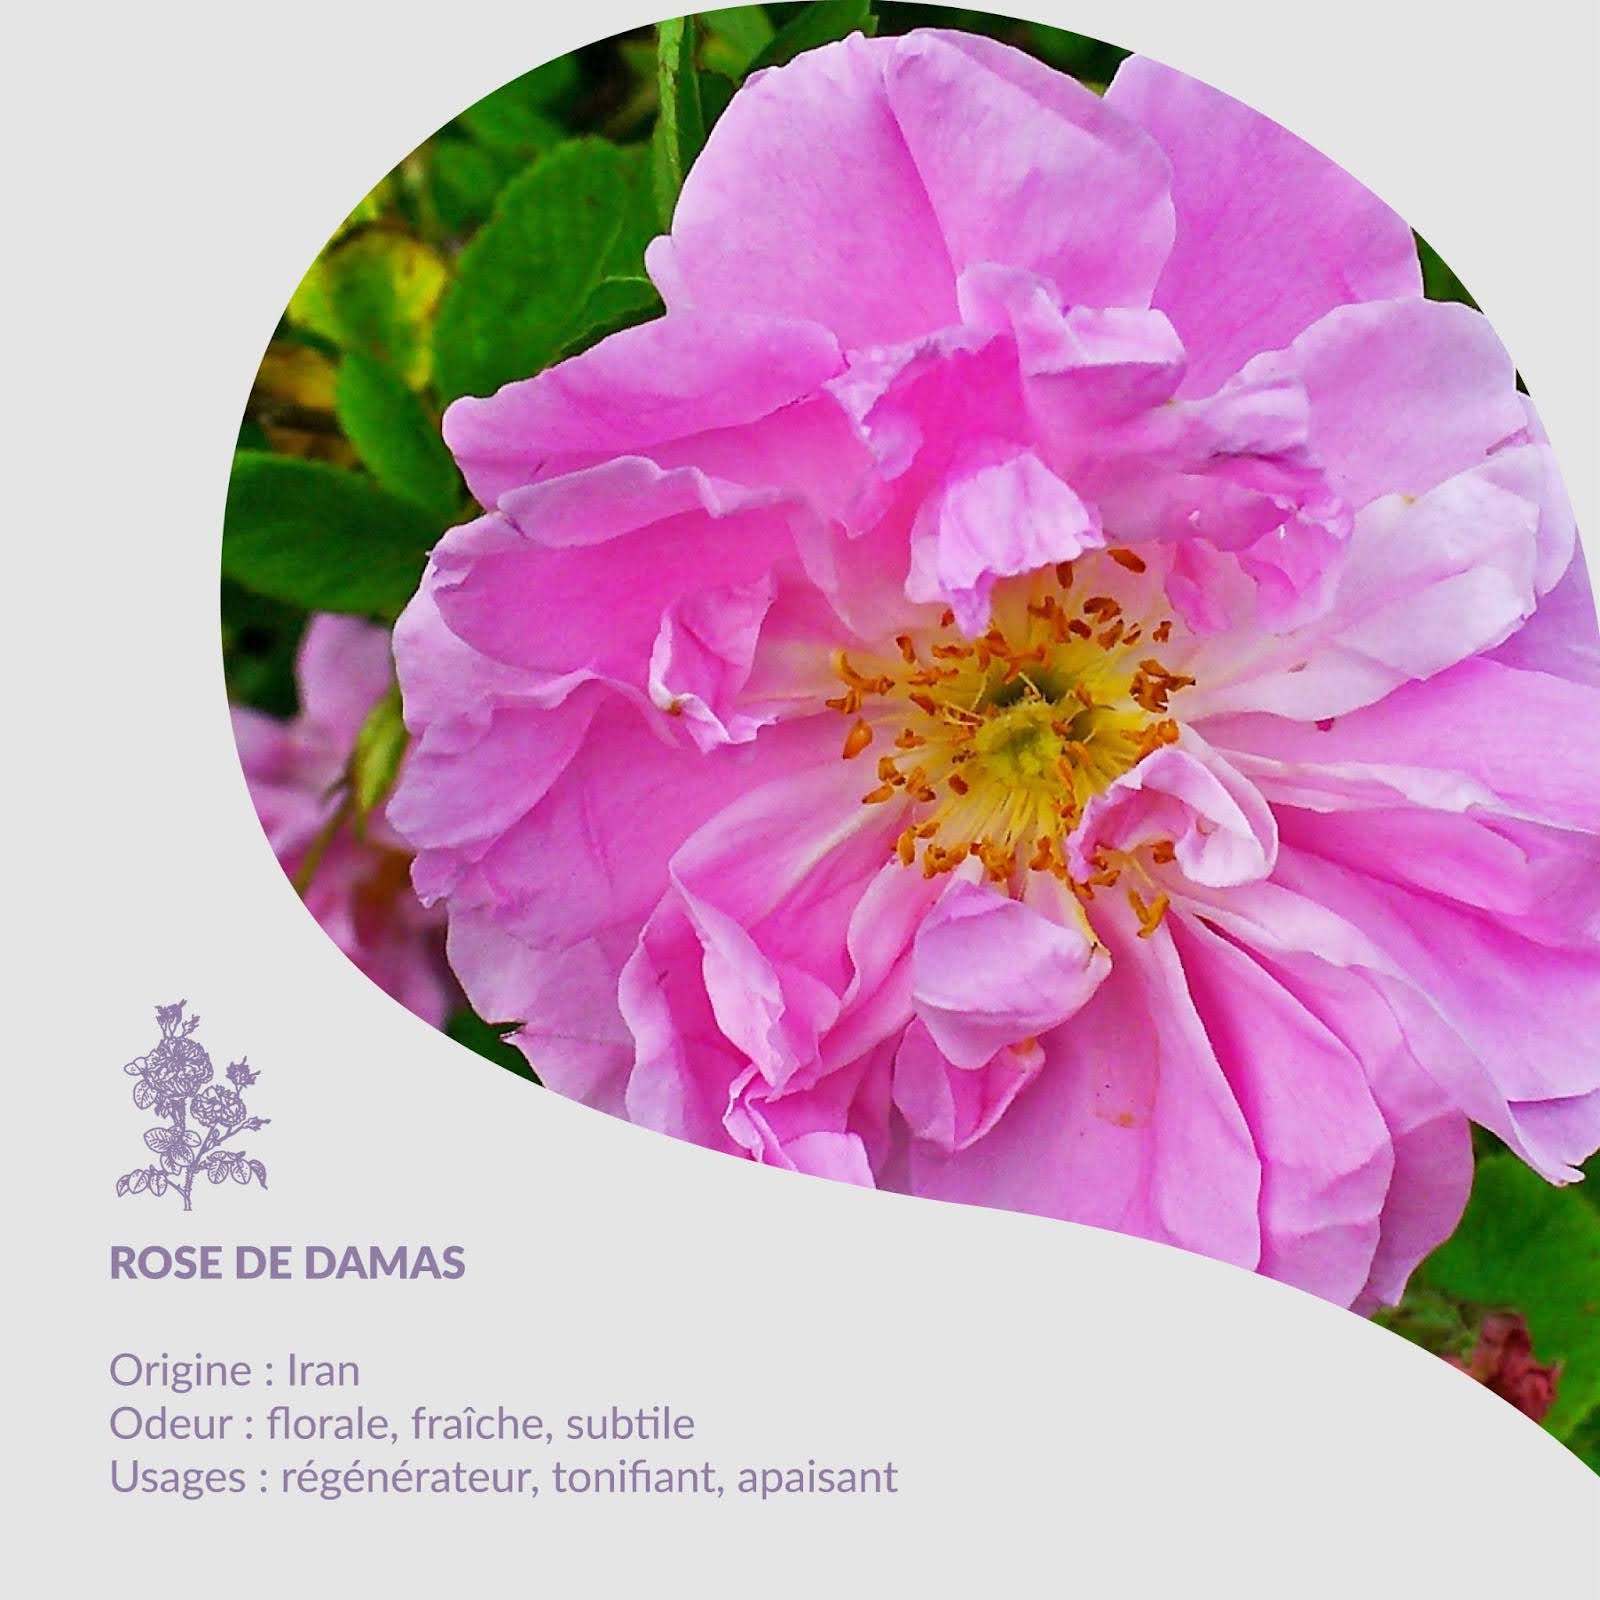 Plant of the Month - Rose